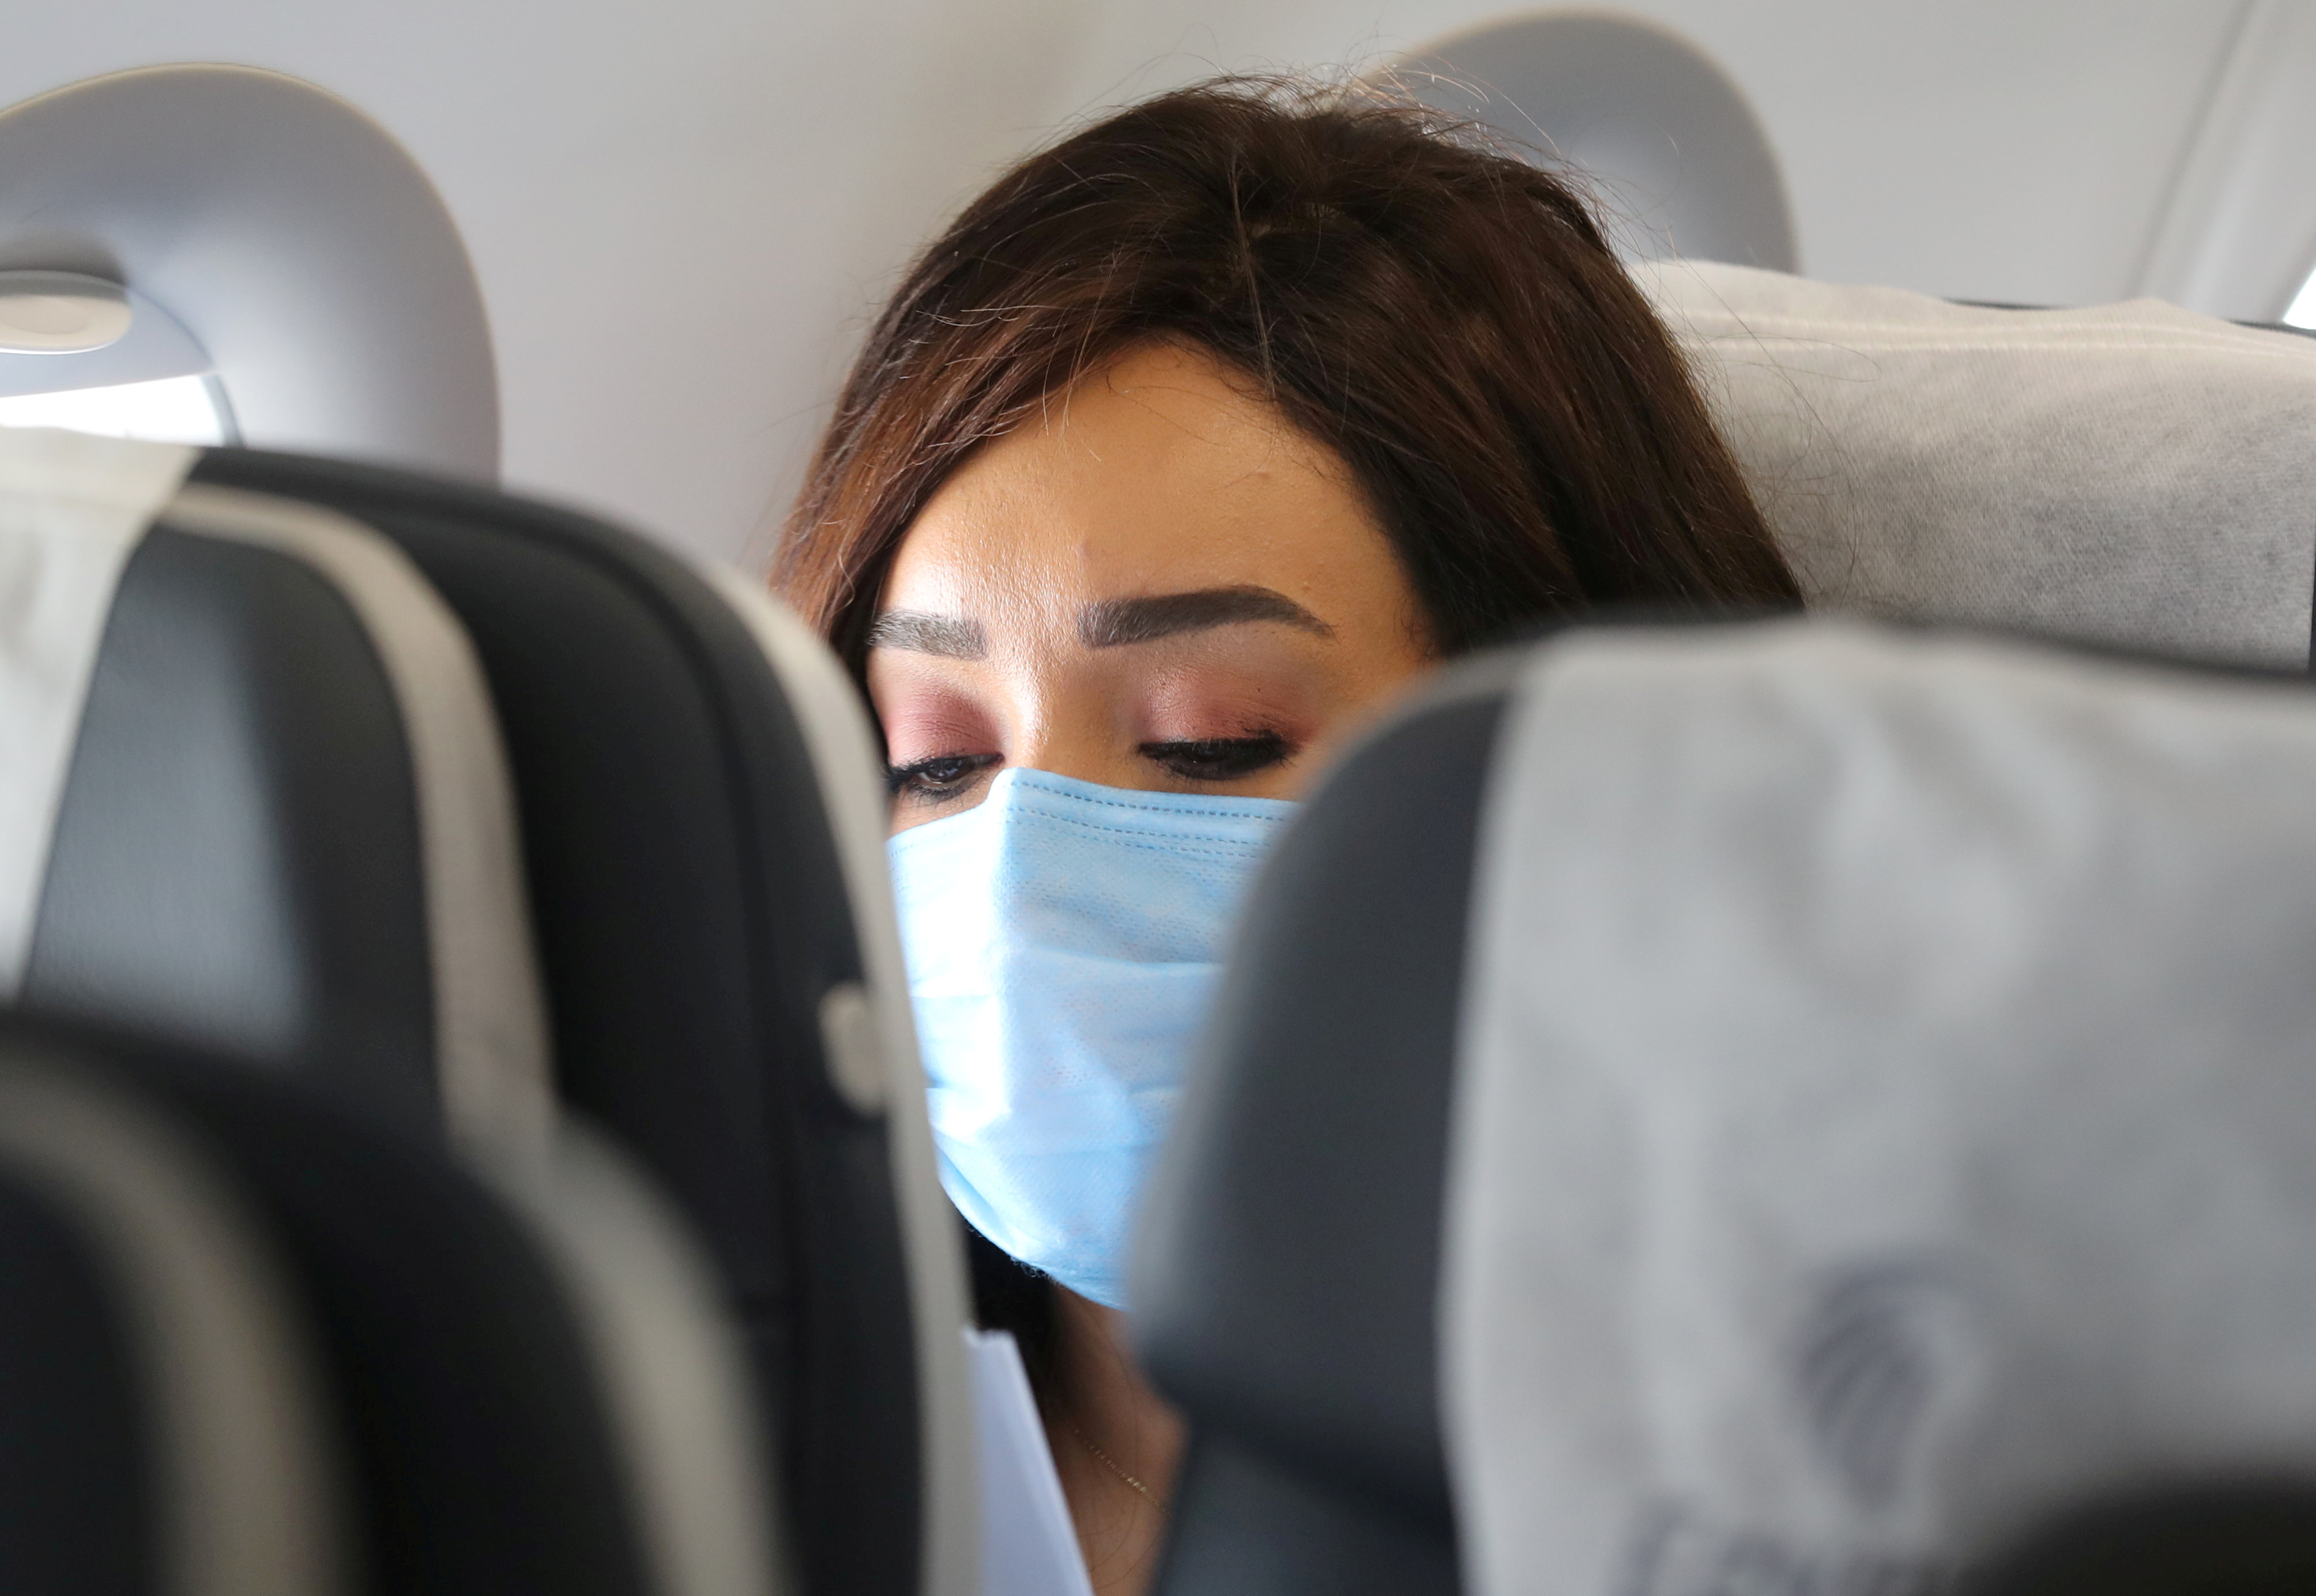 FILE PHOTO: A traveller wears a protective face mask on a plane, following an outbreak of the coronavirus disease (COVID-19), at Cairo International Airport in Cairo, Egypt, June 18, 2020. REUTERS/Mohamed Abd El Ghany/File Photo